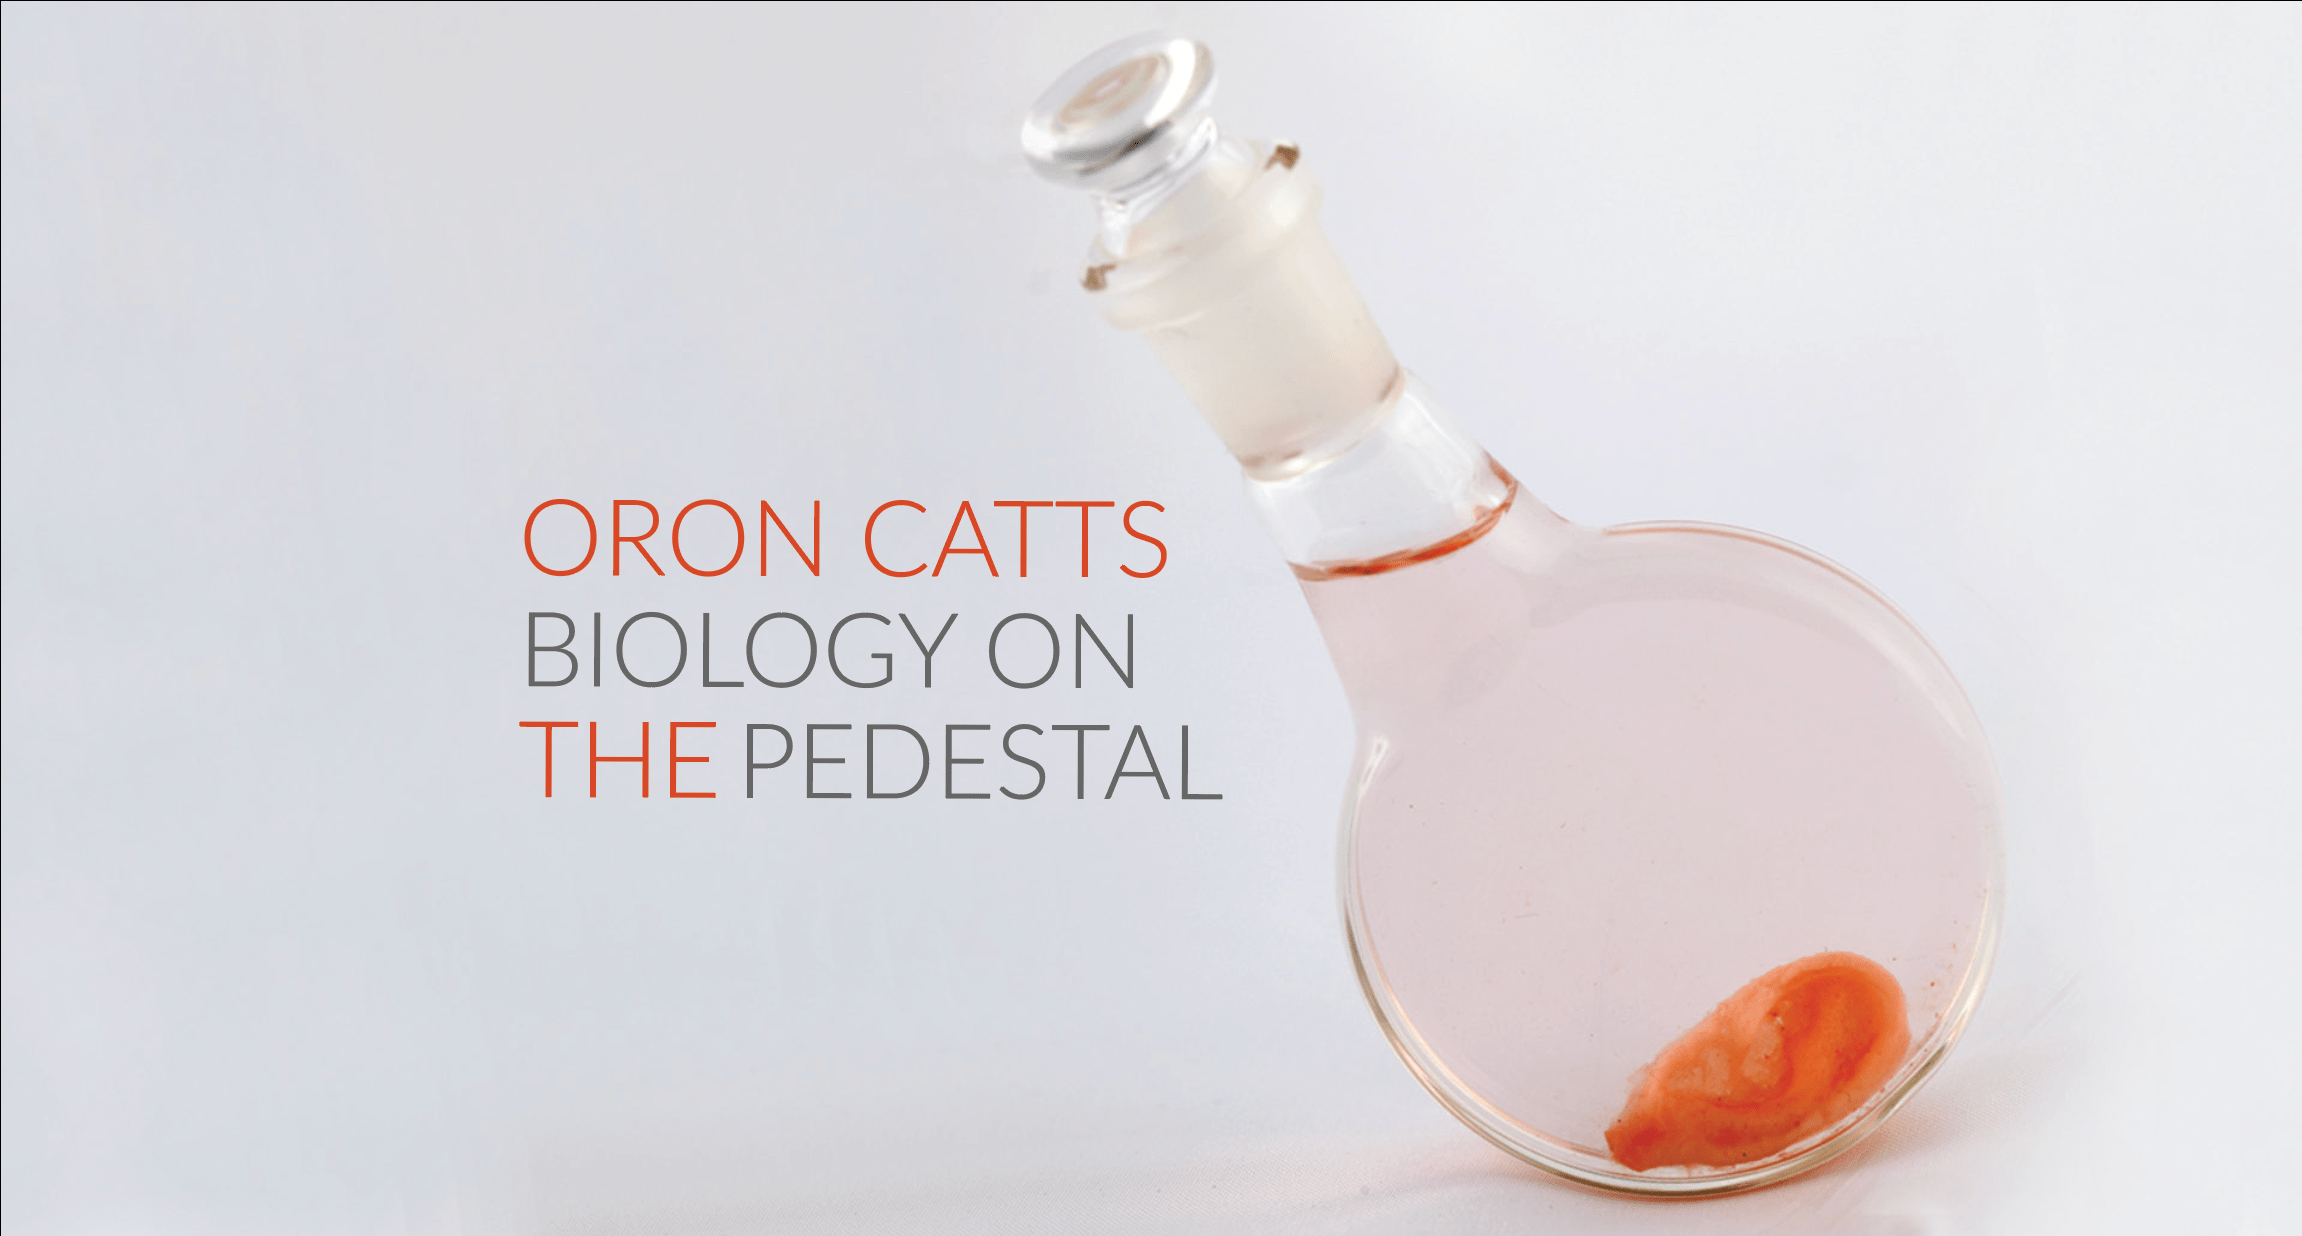 beaker wirh specimin in it next to text "Oron Catts Biology on the Pedestal"